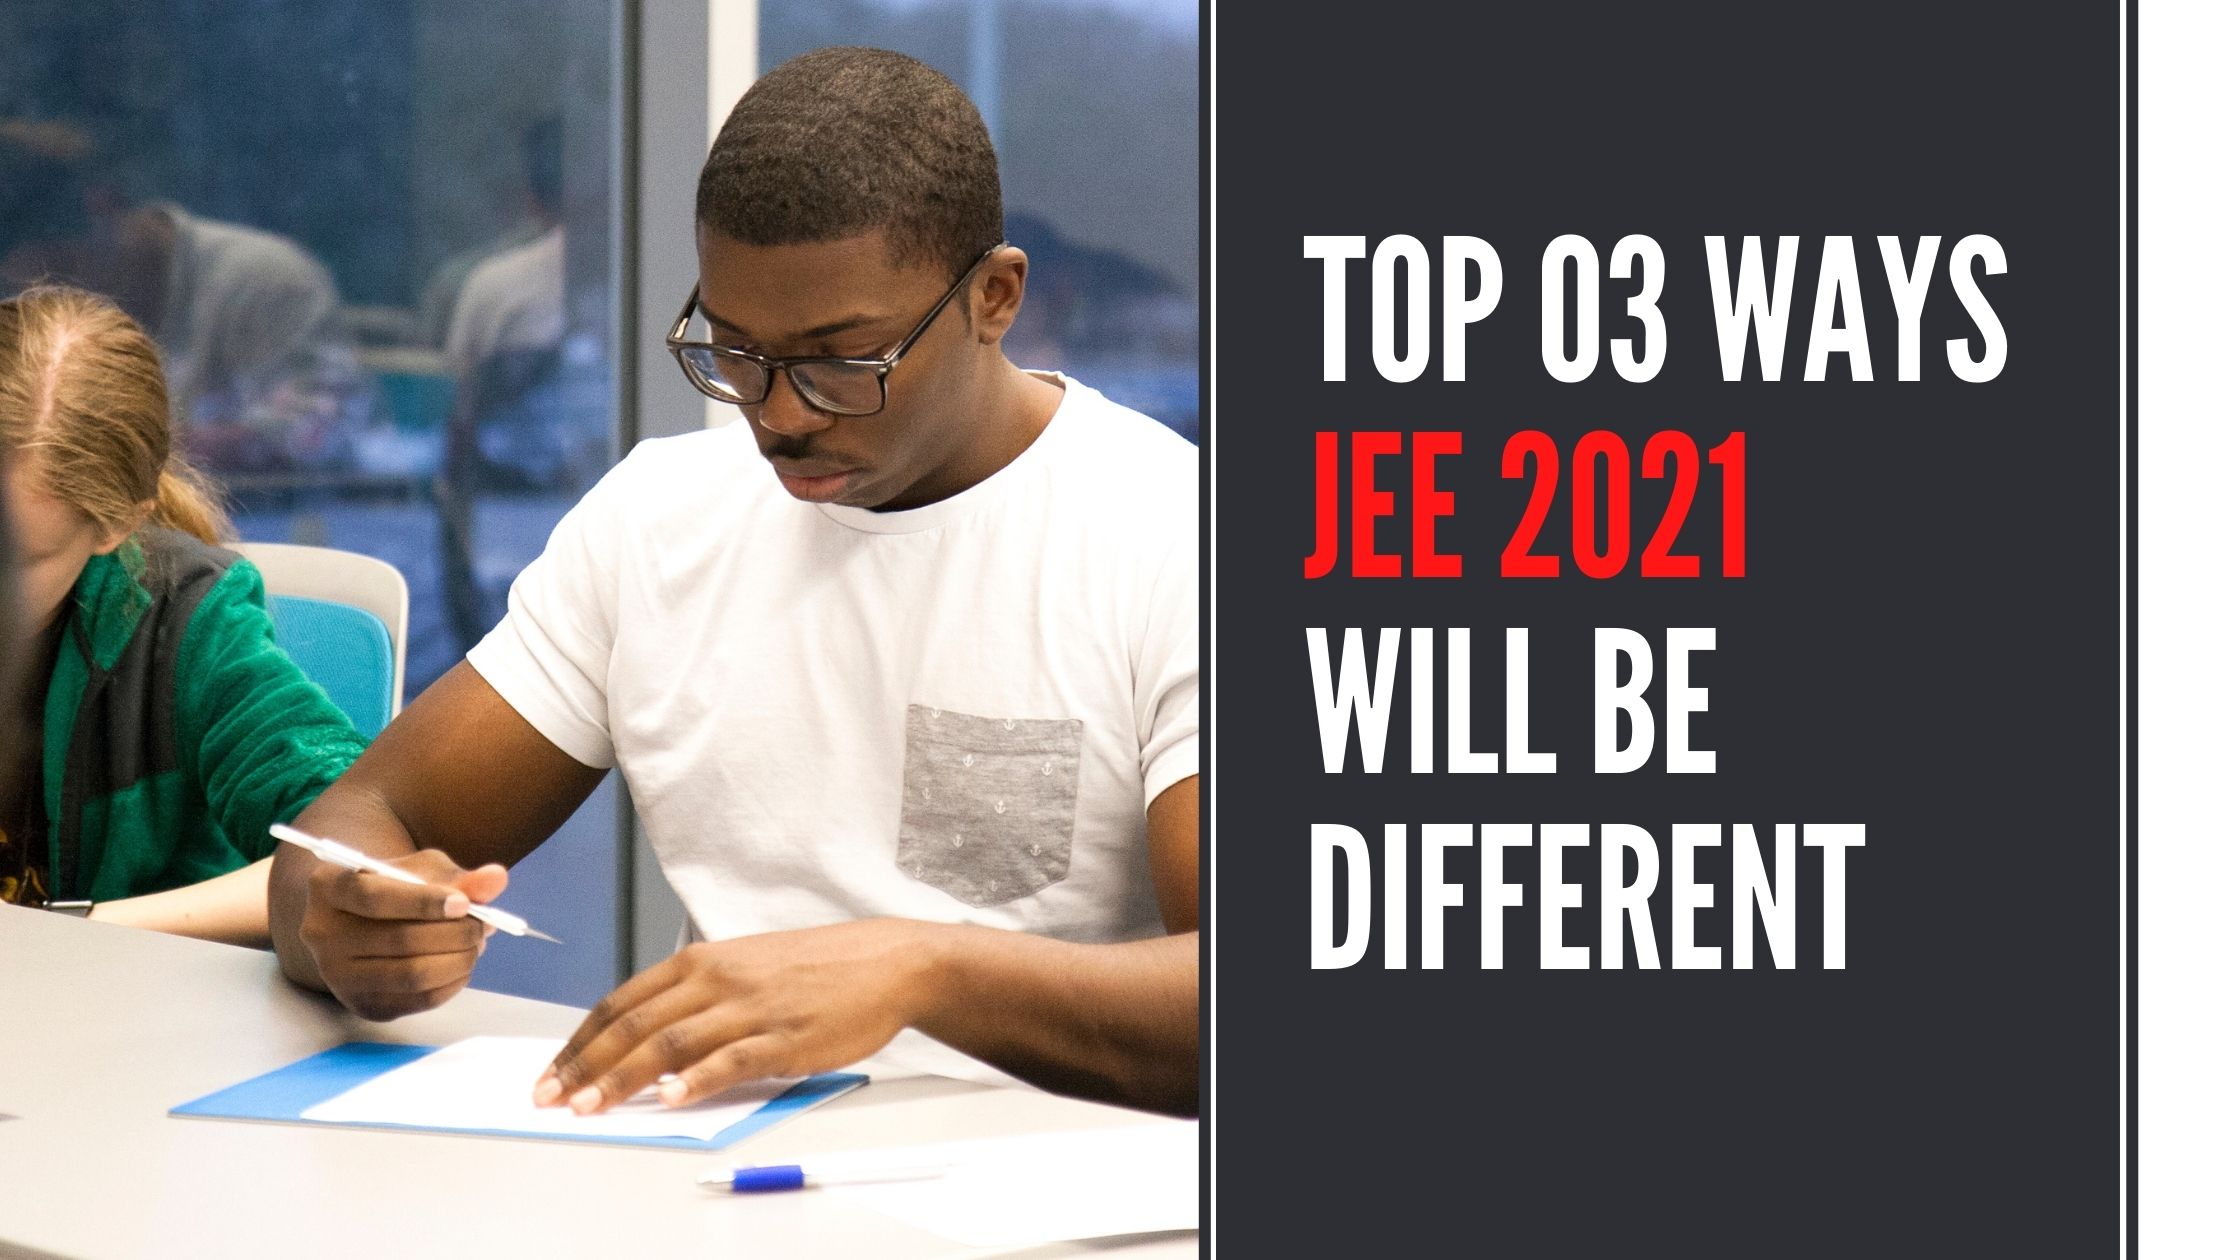 You are currently viewing JEE MAIN 2021 Top 03 ways JEE 2021 will be different